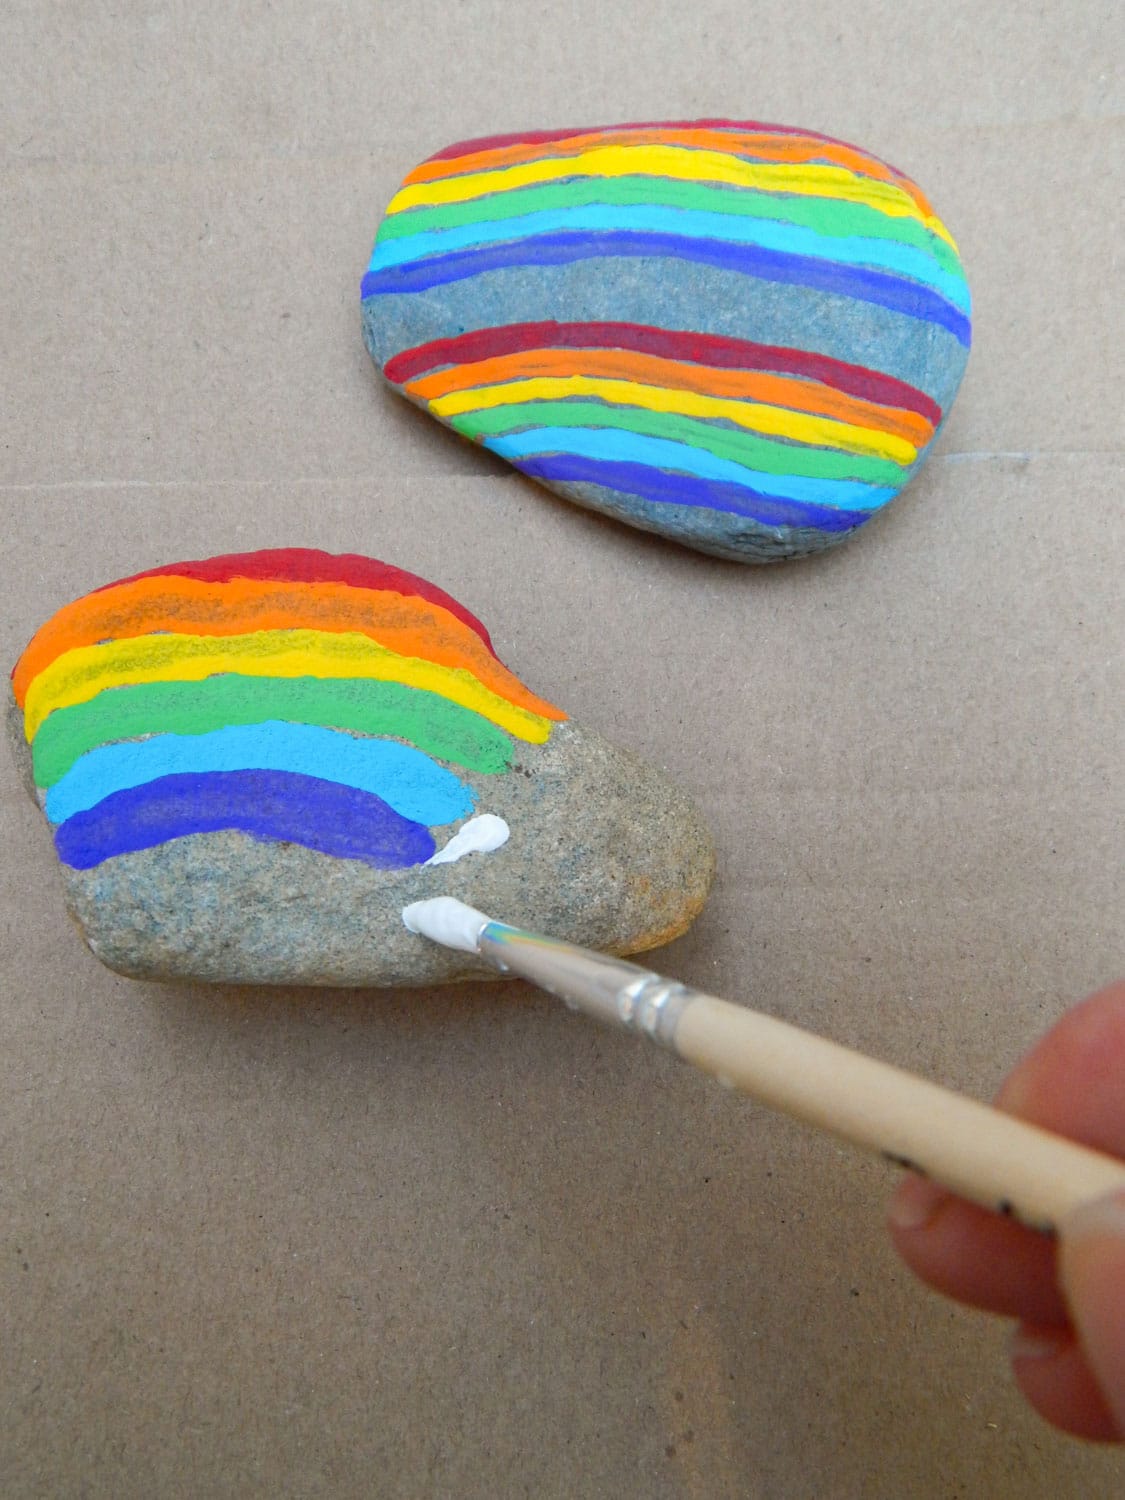 hand holding a small paint brush making a white cloud at the end of a rainbow painted on a rock. Double rainbow painted rock above. Both rocks on cardboard.